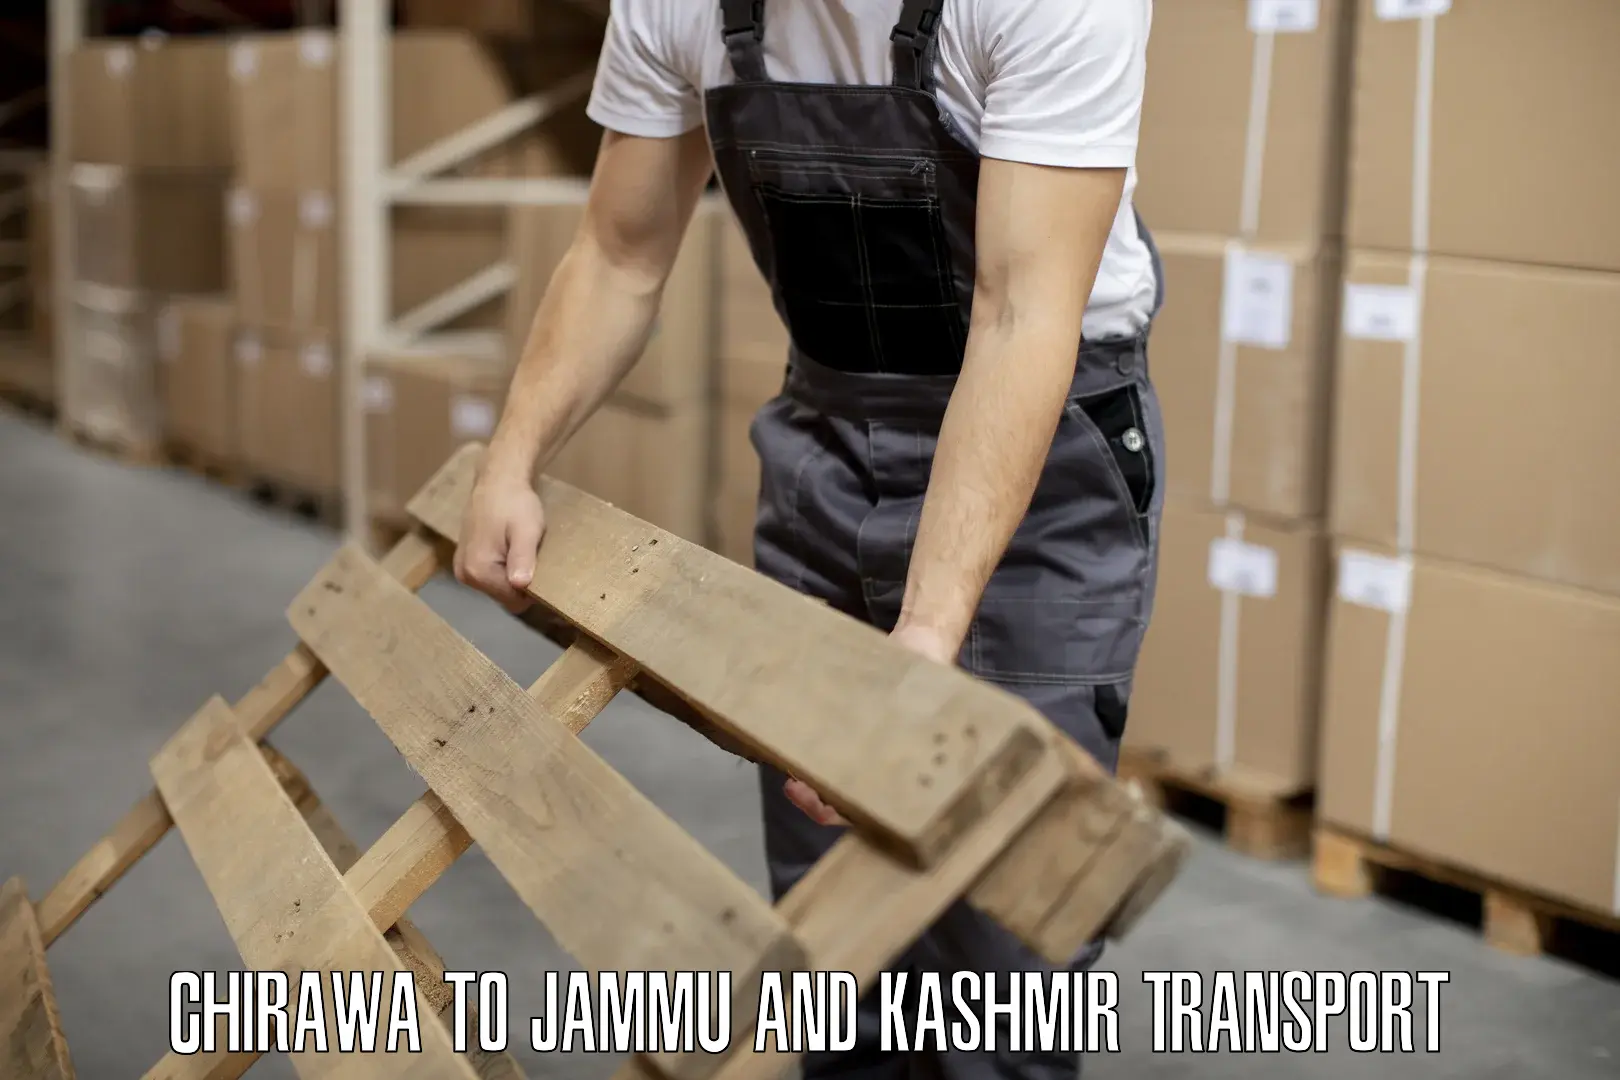 Transport shared services in Chirawa to Kargil